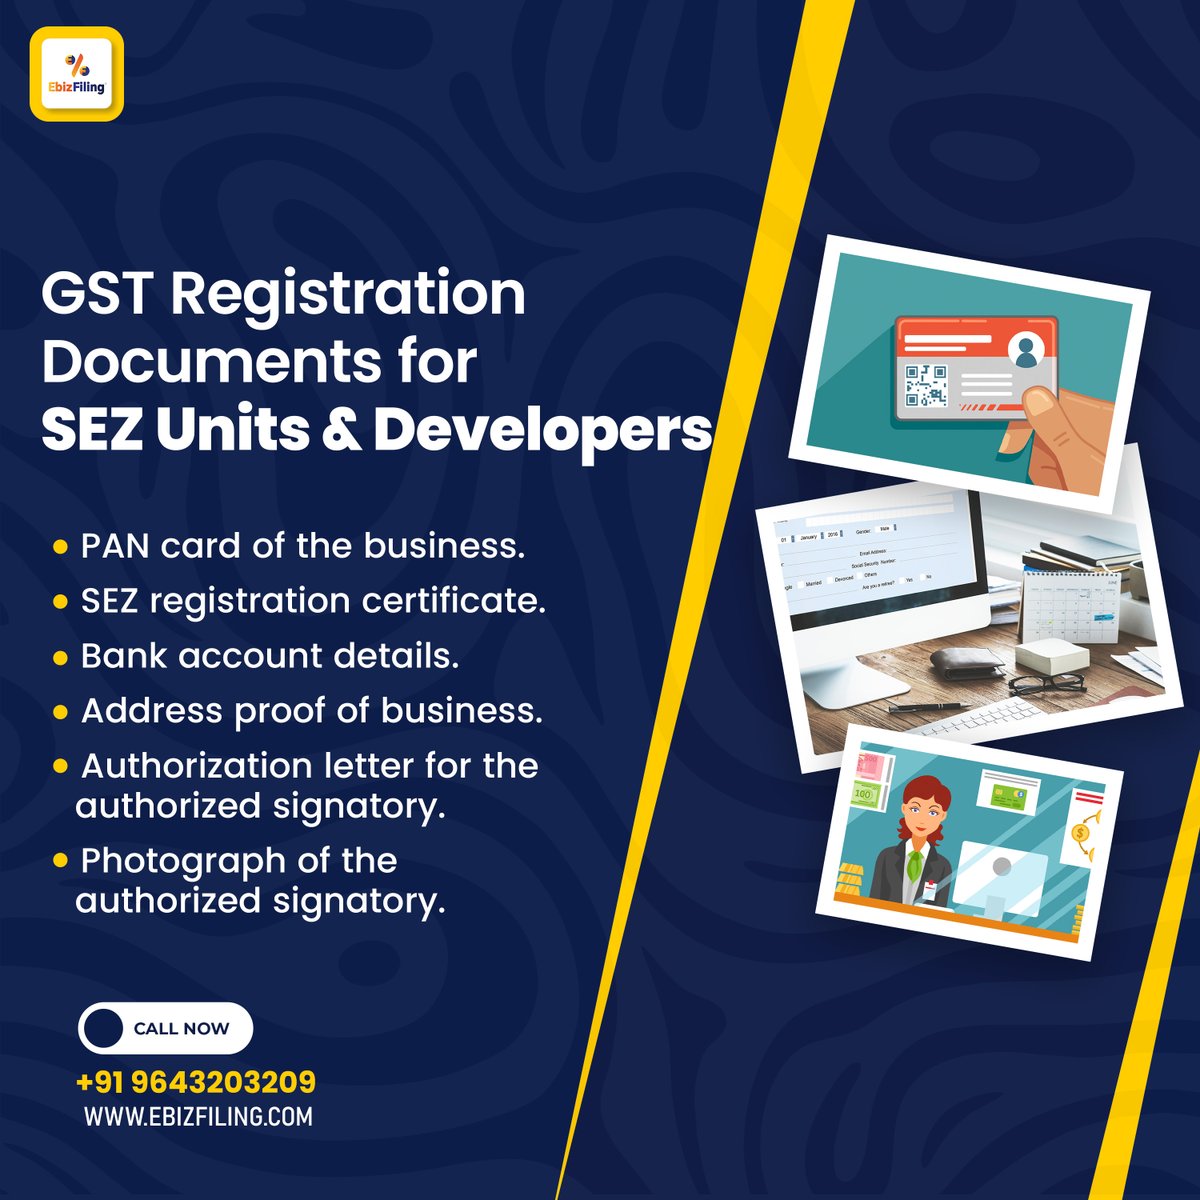 🔓 Unlock the documents of GST registration for SEZ units and developers🔍

Connect with us! 📧 info@ebizfiling.com | 📞 +91 9643203209 | 💻 ebizfiling.com

#gstregistration #SEZunit #documents #developers #pan #bank #tax #companyregistration #ebizfiling